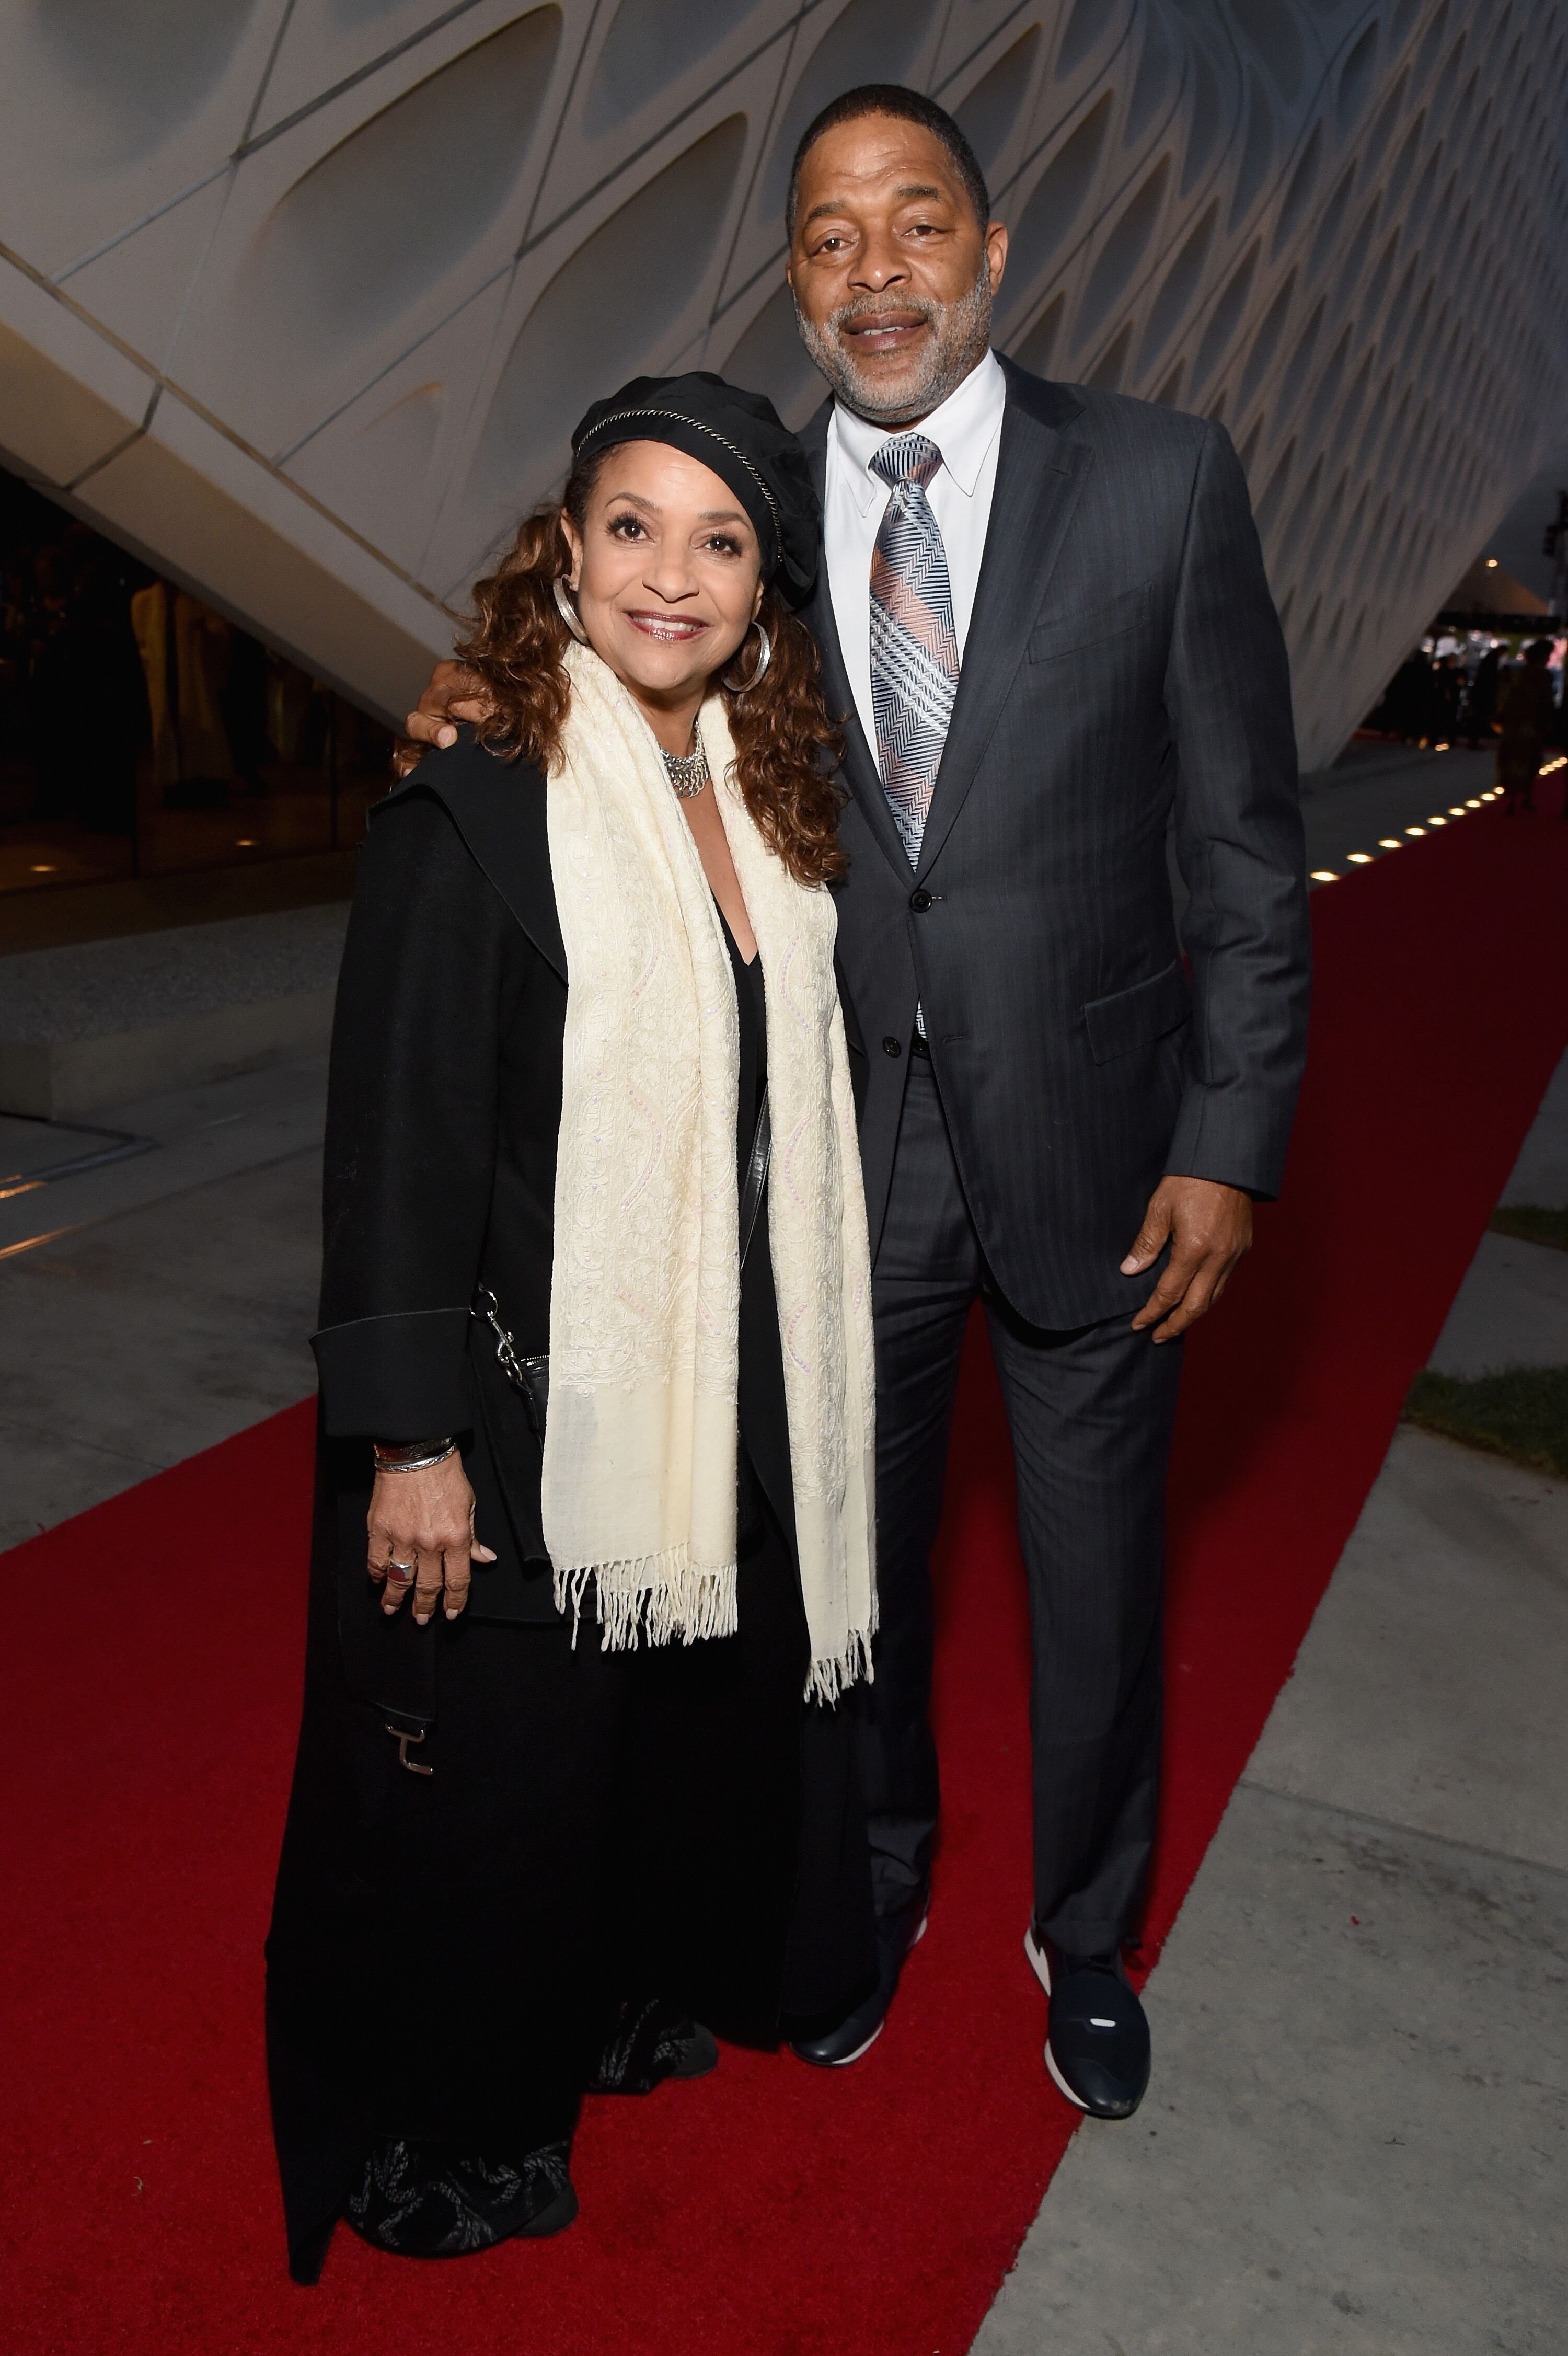 Debbie Allen and Norm Nixon celebrate with Land Rover at The Broad museum's opening celebration of its new art exhibition on March 22, 2019 in Los Angeles, California | Photo: Getty Images